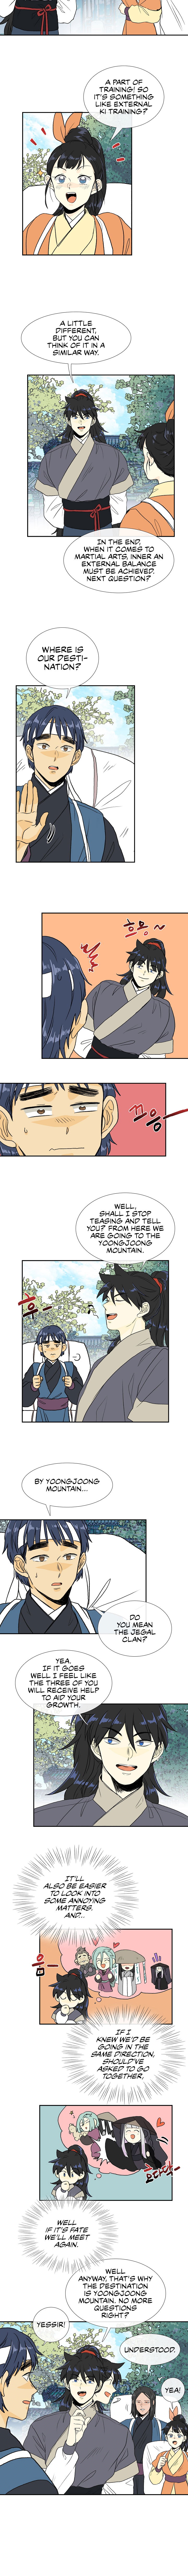 The Scholar's Reincarnation Chapter 122 page 5